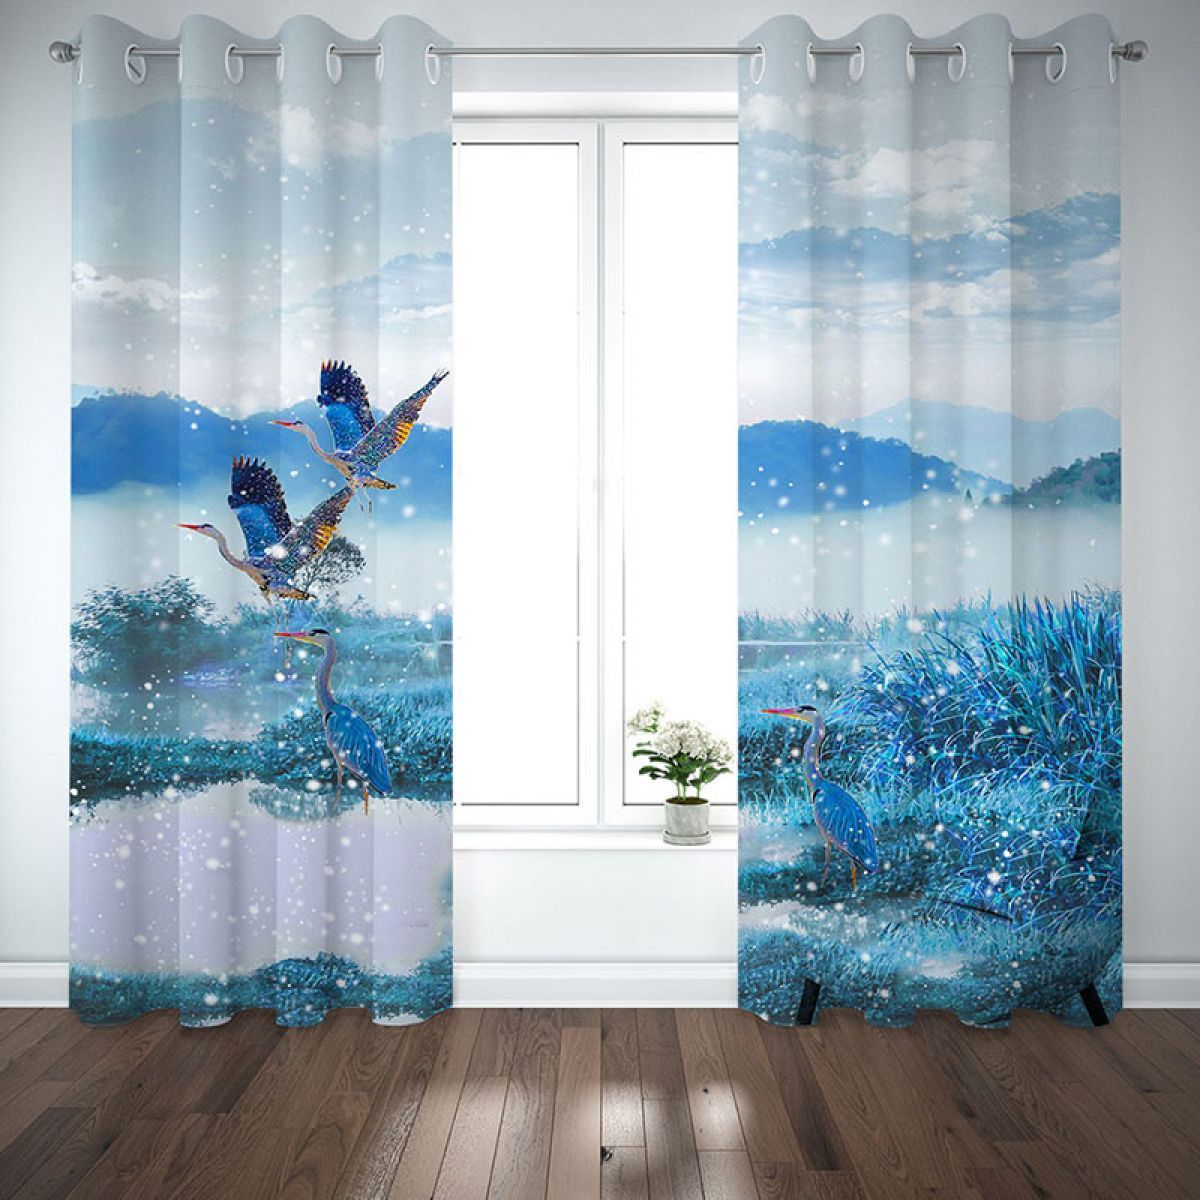 3d Blue Herons In The Wild Printed Window Curtain Home Decor